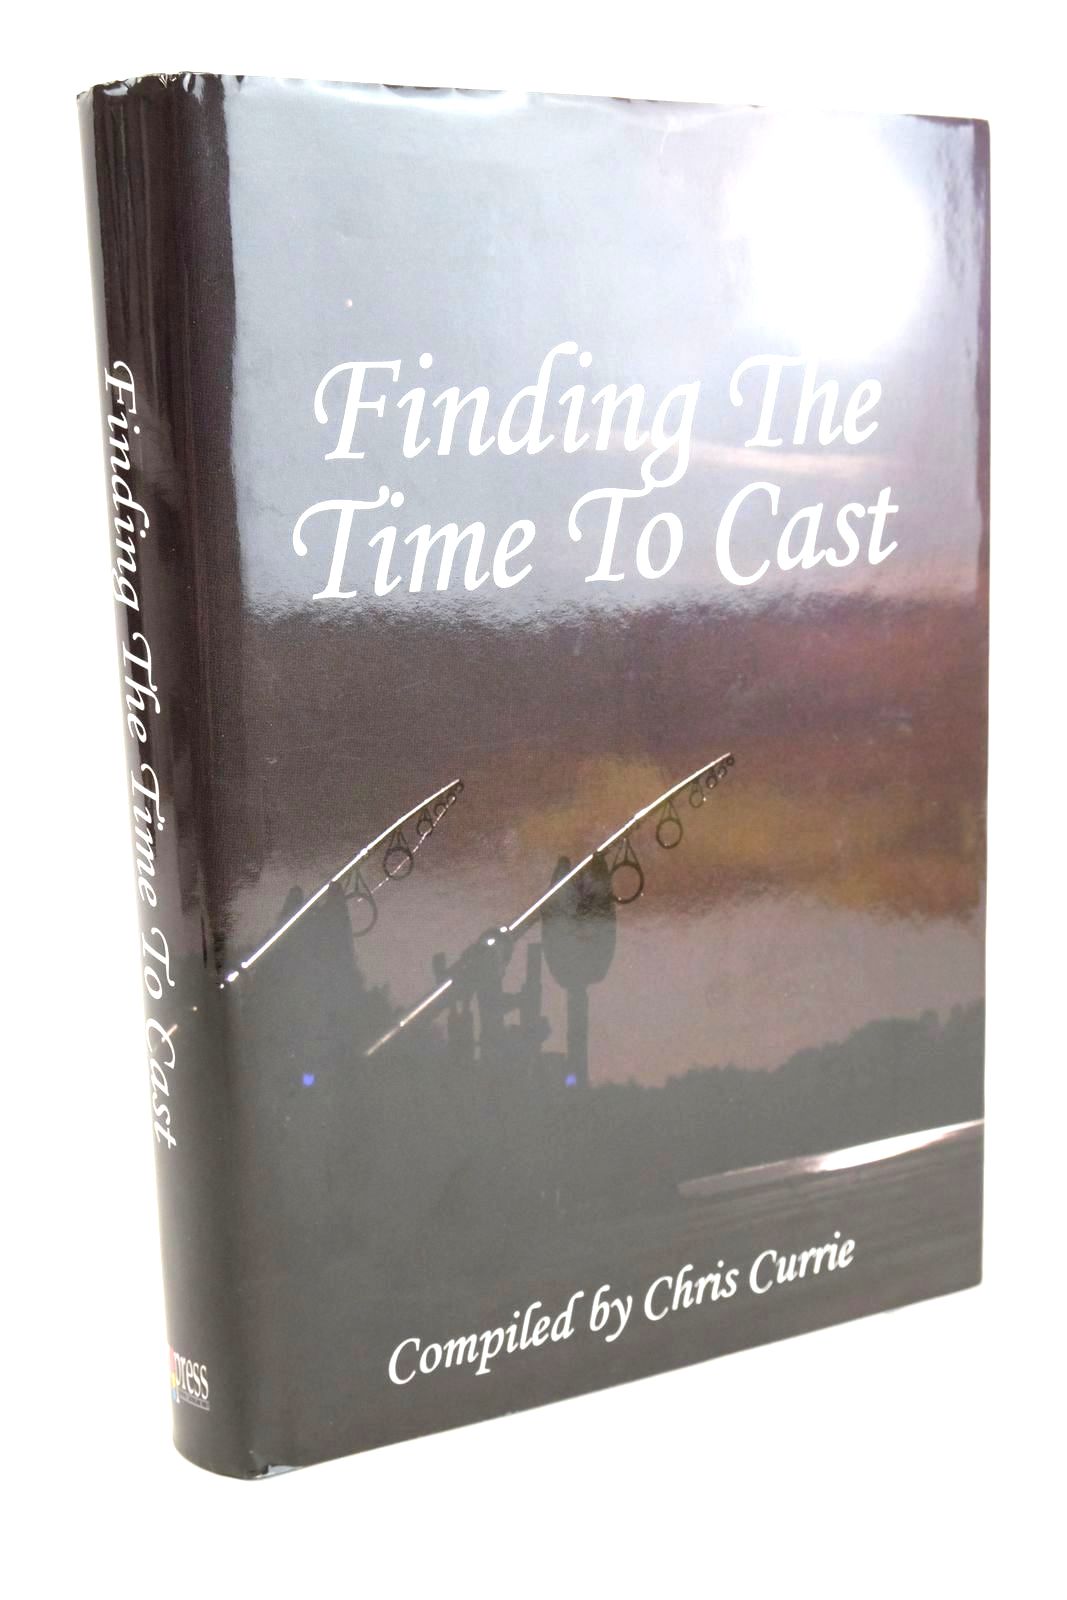 Photo of FINDING THE TIME TO CAST written by Currie, Chris et al, illustrated by Currie, Chis published by M Press (media) Ltd. (STOCK CODE: 1327512)  for sale by Stella & Rose's Books